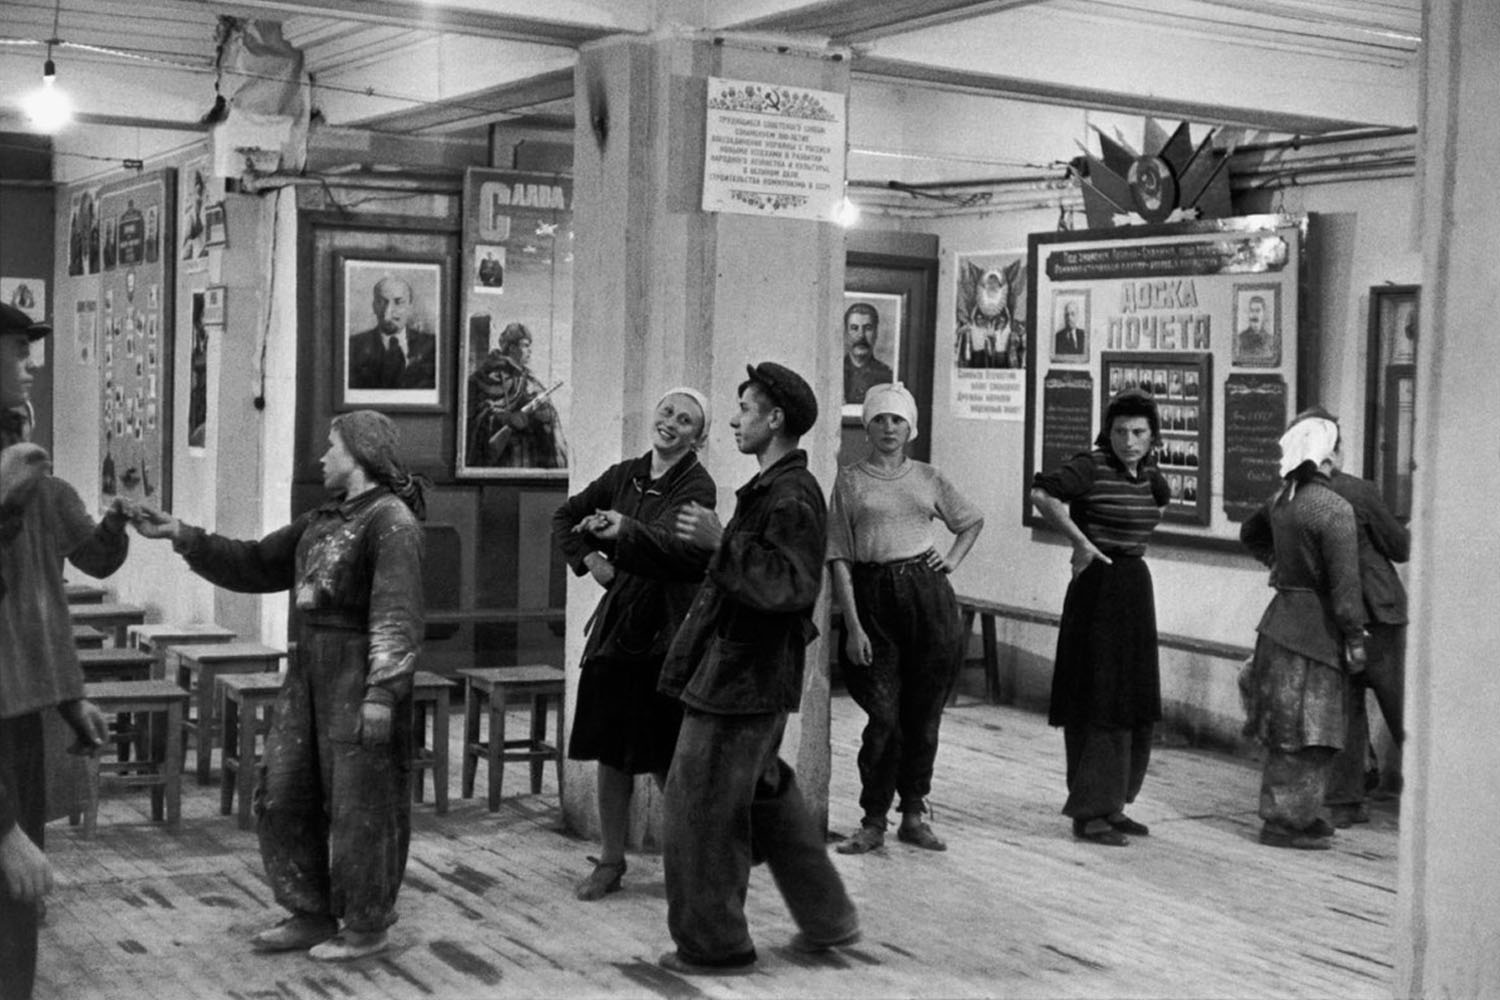 SOVIET UNION. Moscow. 1954. Canteen for workers building the Hotel Metropol.